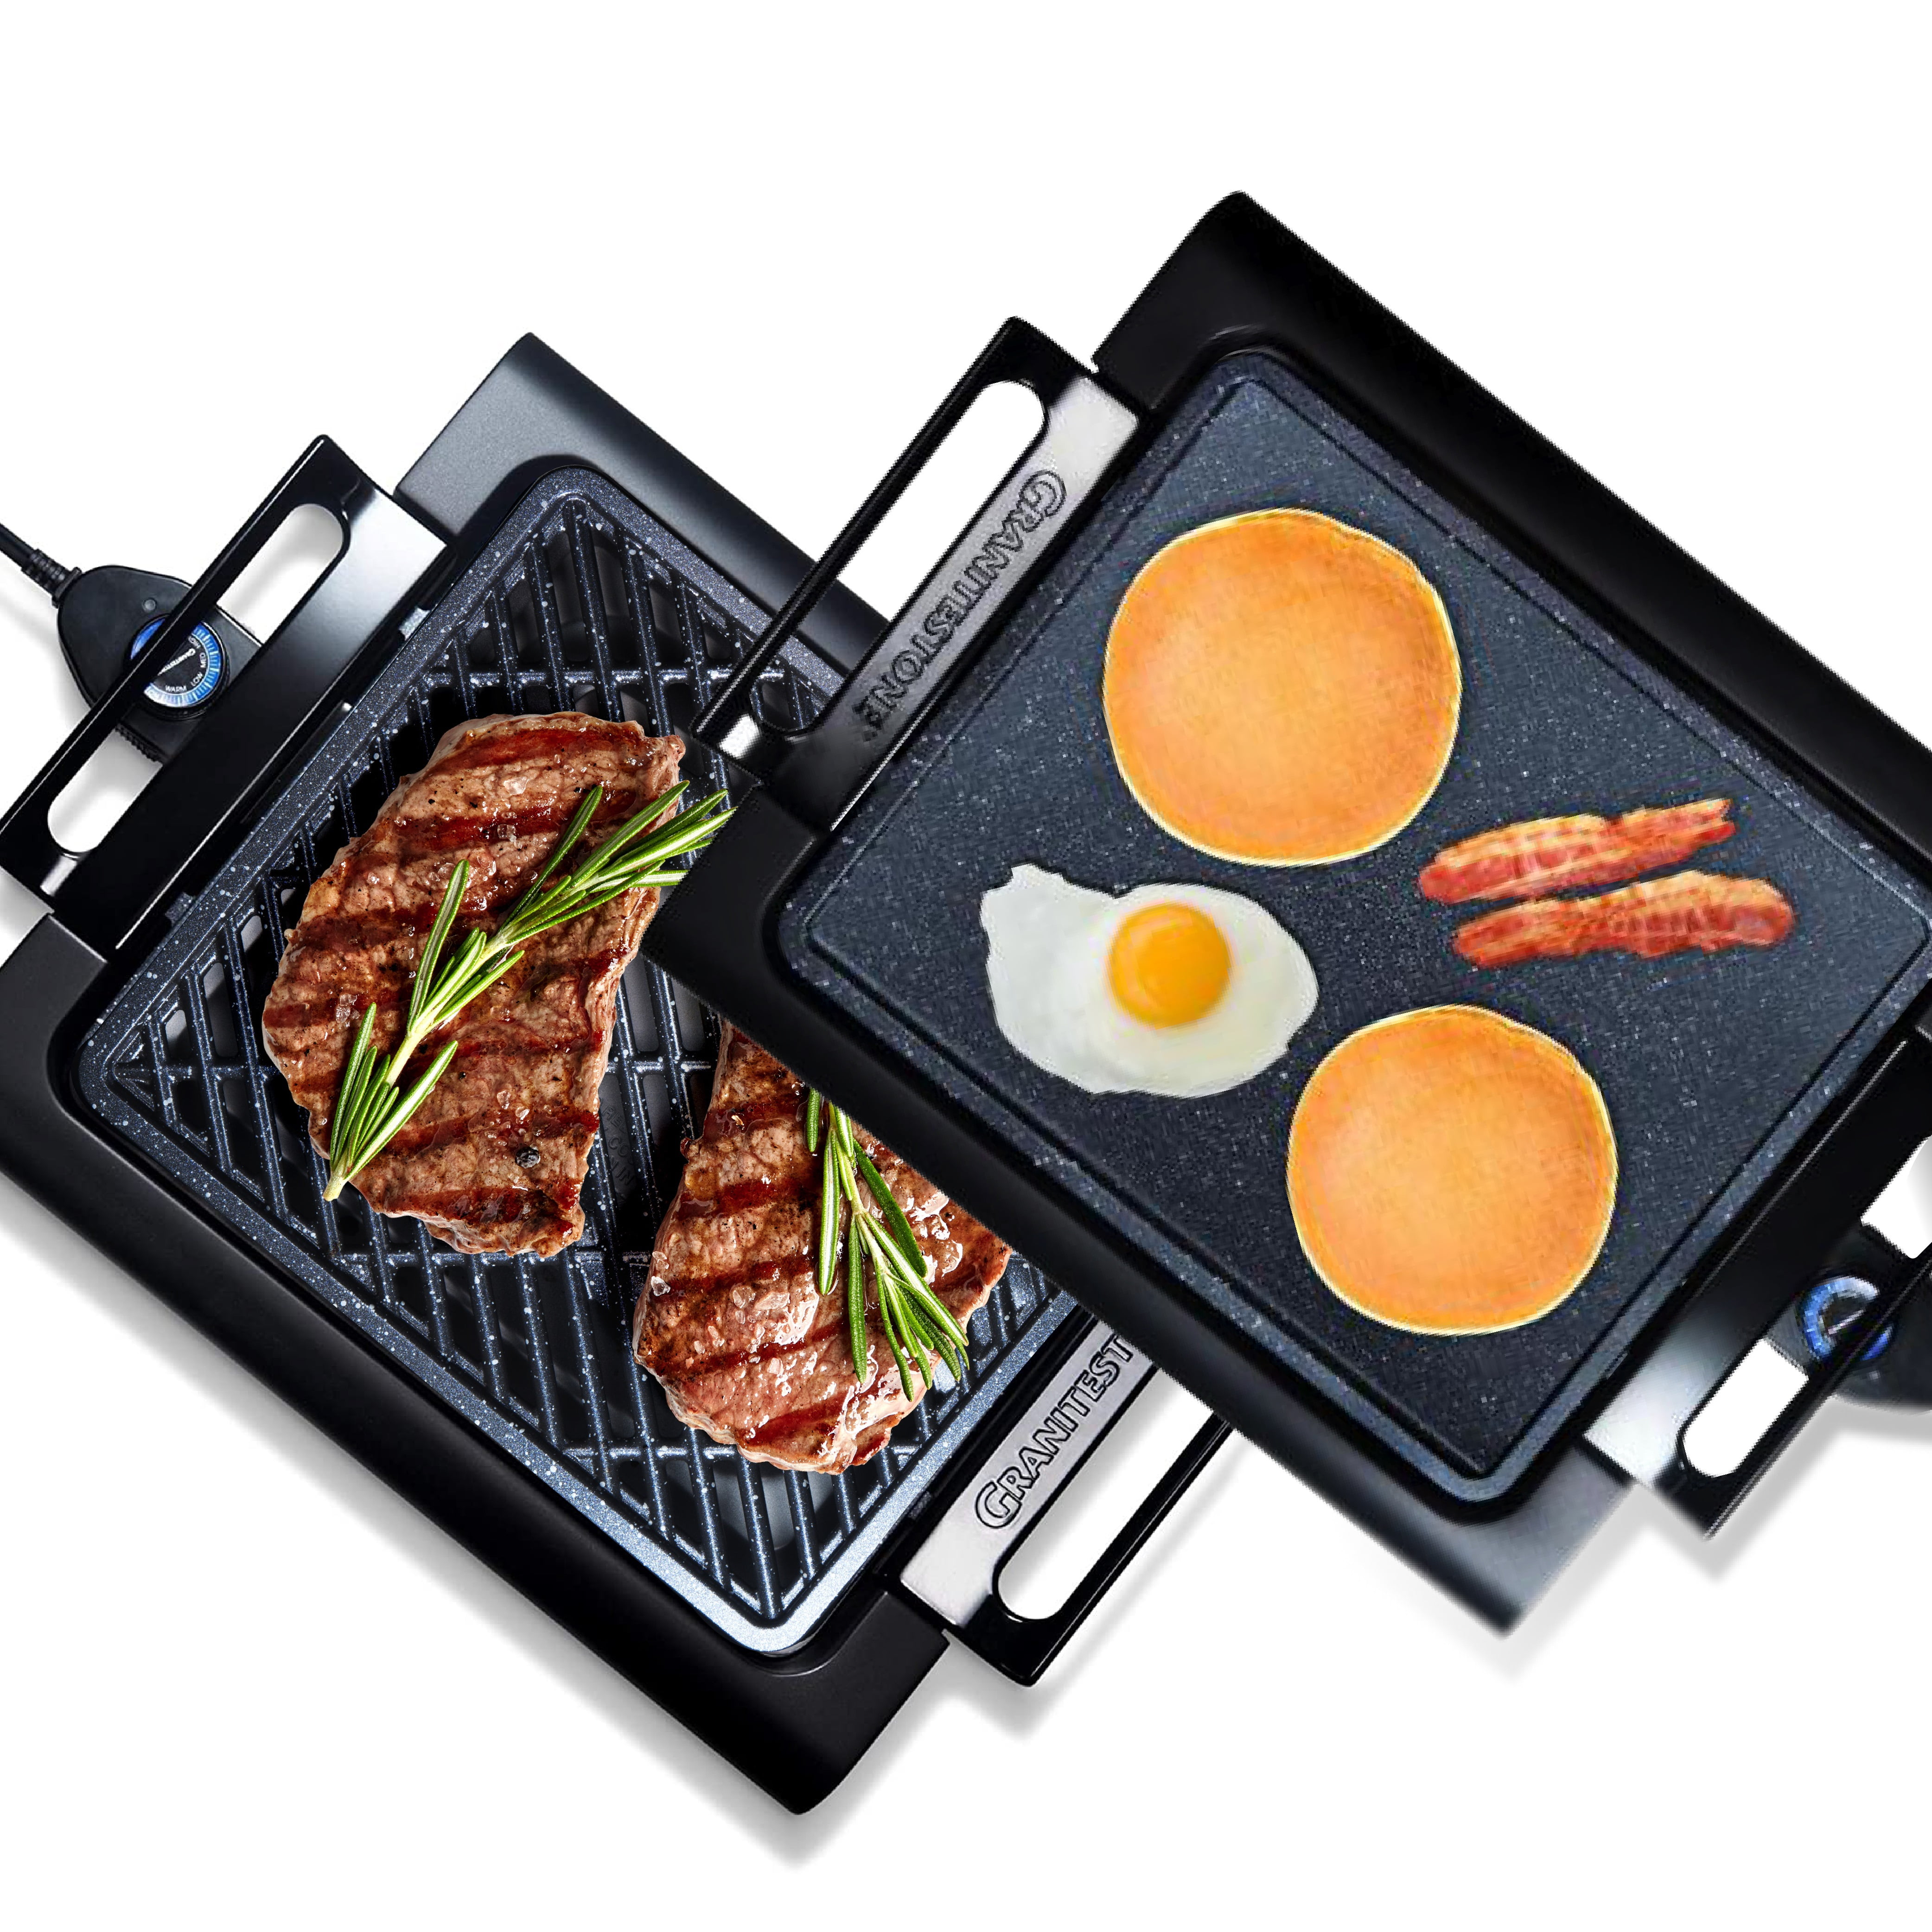 This Stovetop Grill Pan Lets You Grill Indoors Without Smoke